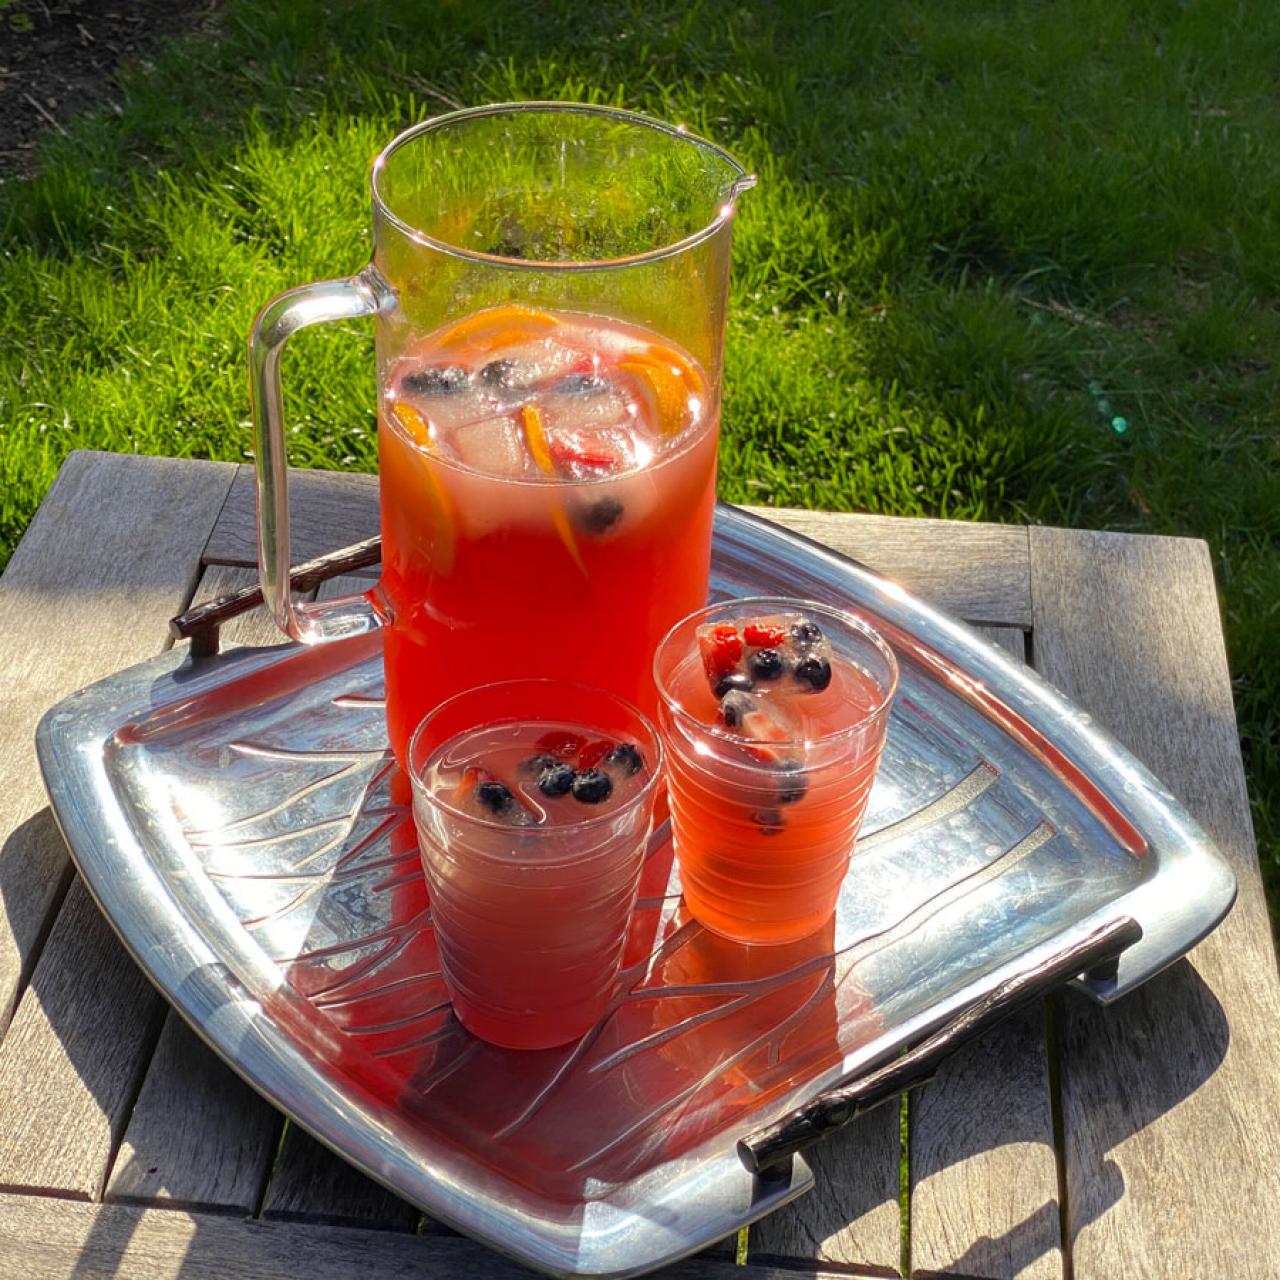 Vodka Party Punch - Recipe Girl